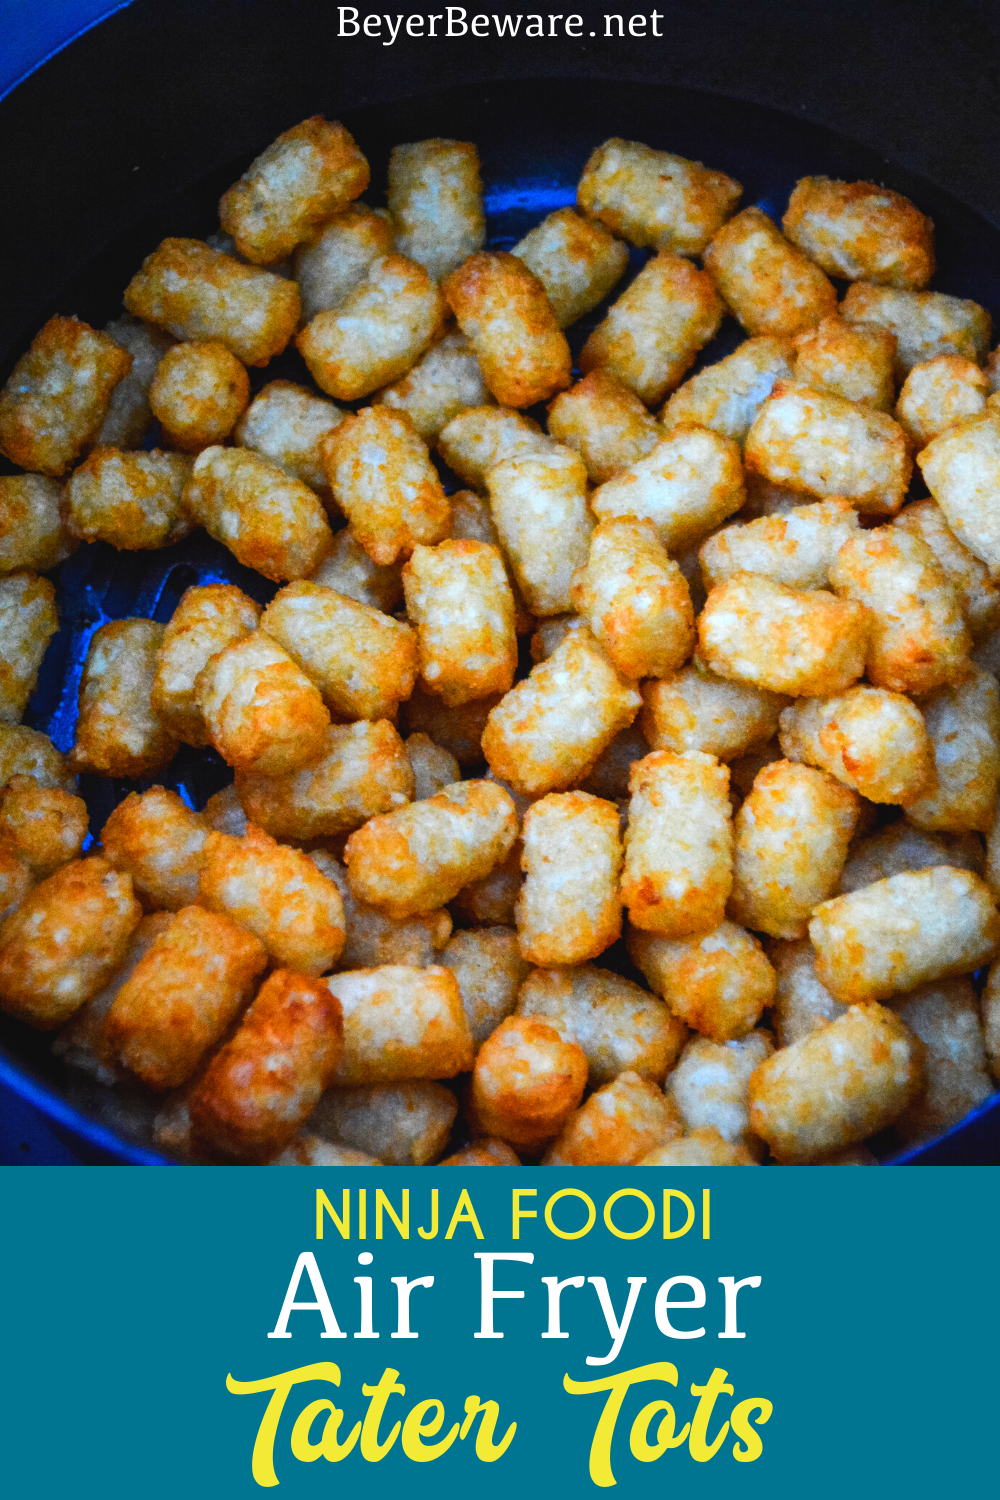 Ninja Foodi Air Fryer Tater Tots are the best tater tots you can make at home in under 15 minutes and mini tater tots for the best tots.